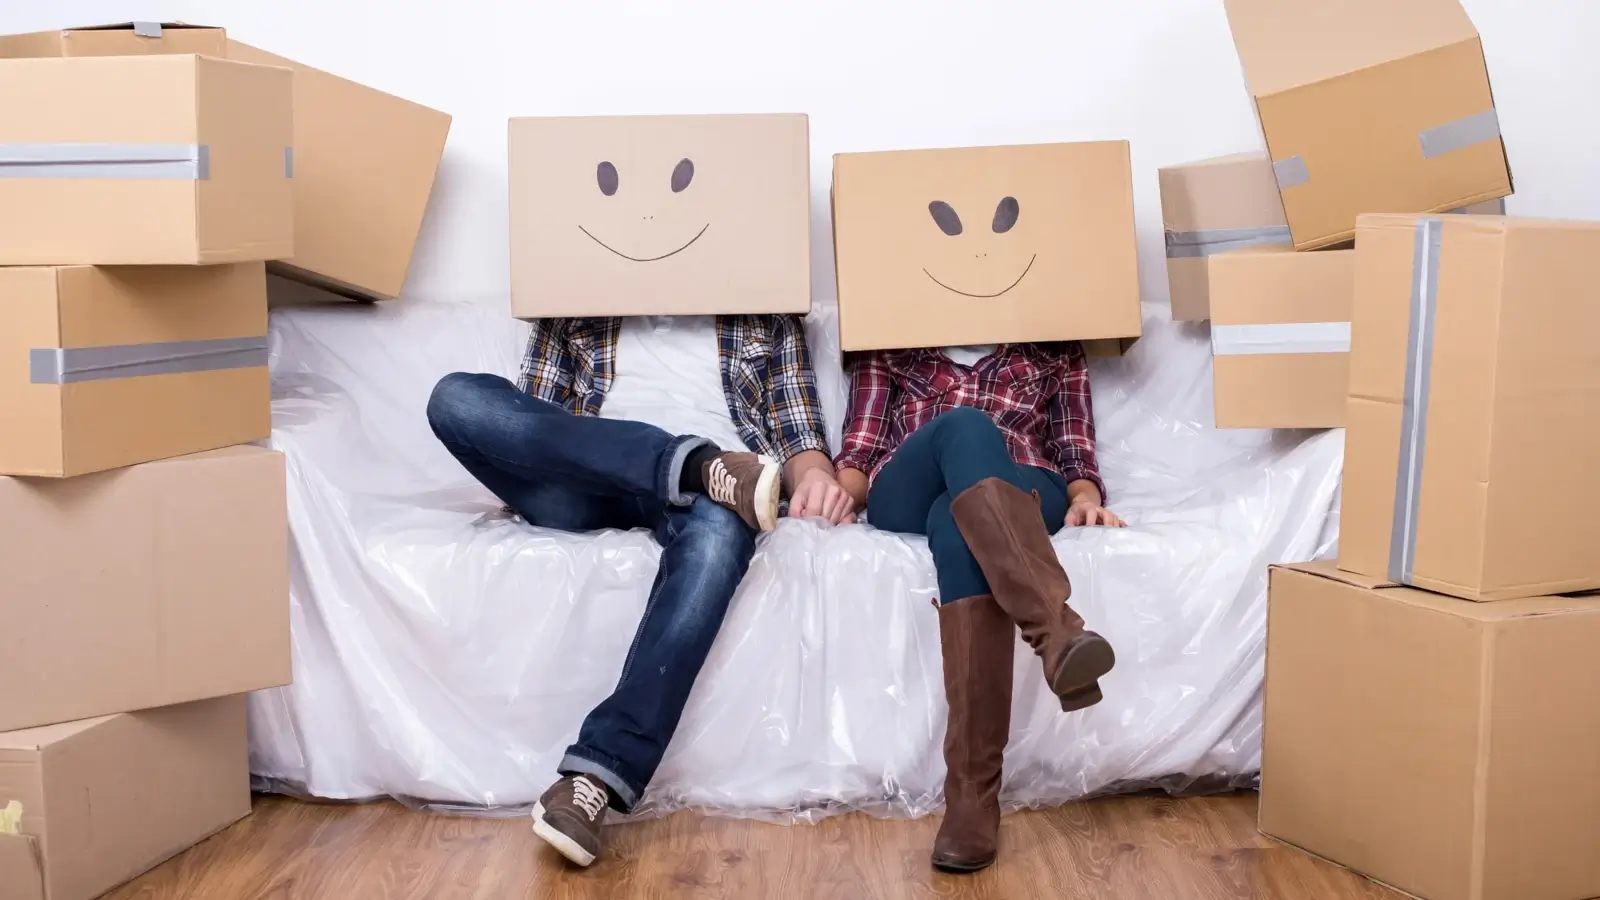 Couple with cardboard box heads sitting among moving boxes.